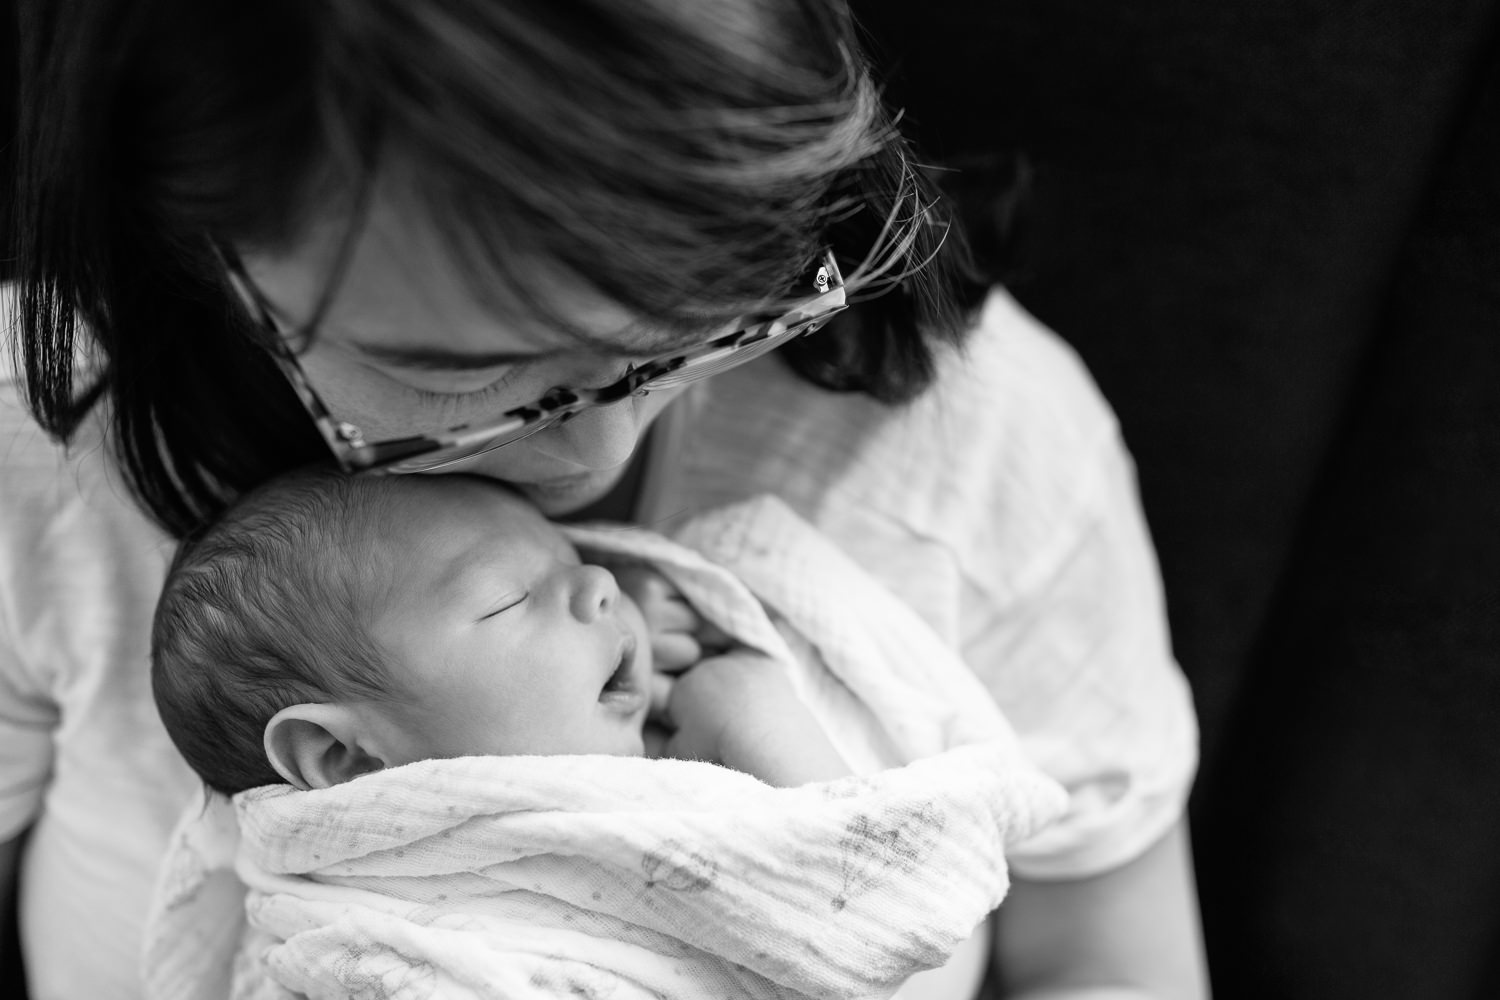 new mother with long dark hair sitting in nursery chair with 2 week old baby boy in swaddle asleep on her chest, mom's cheek resting against top of son's head - Stouffville Lifestyle Photos